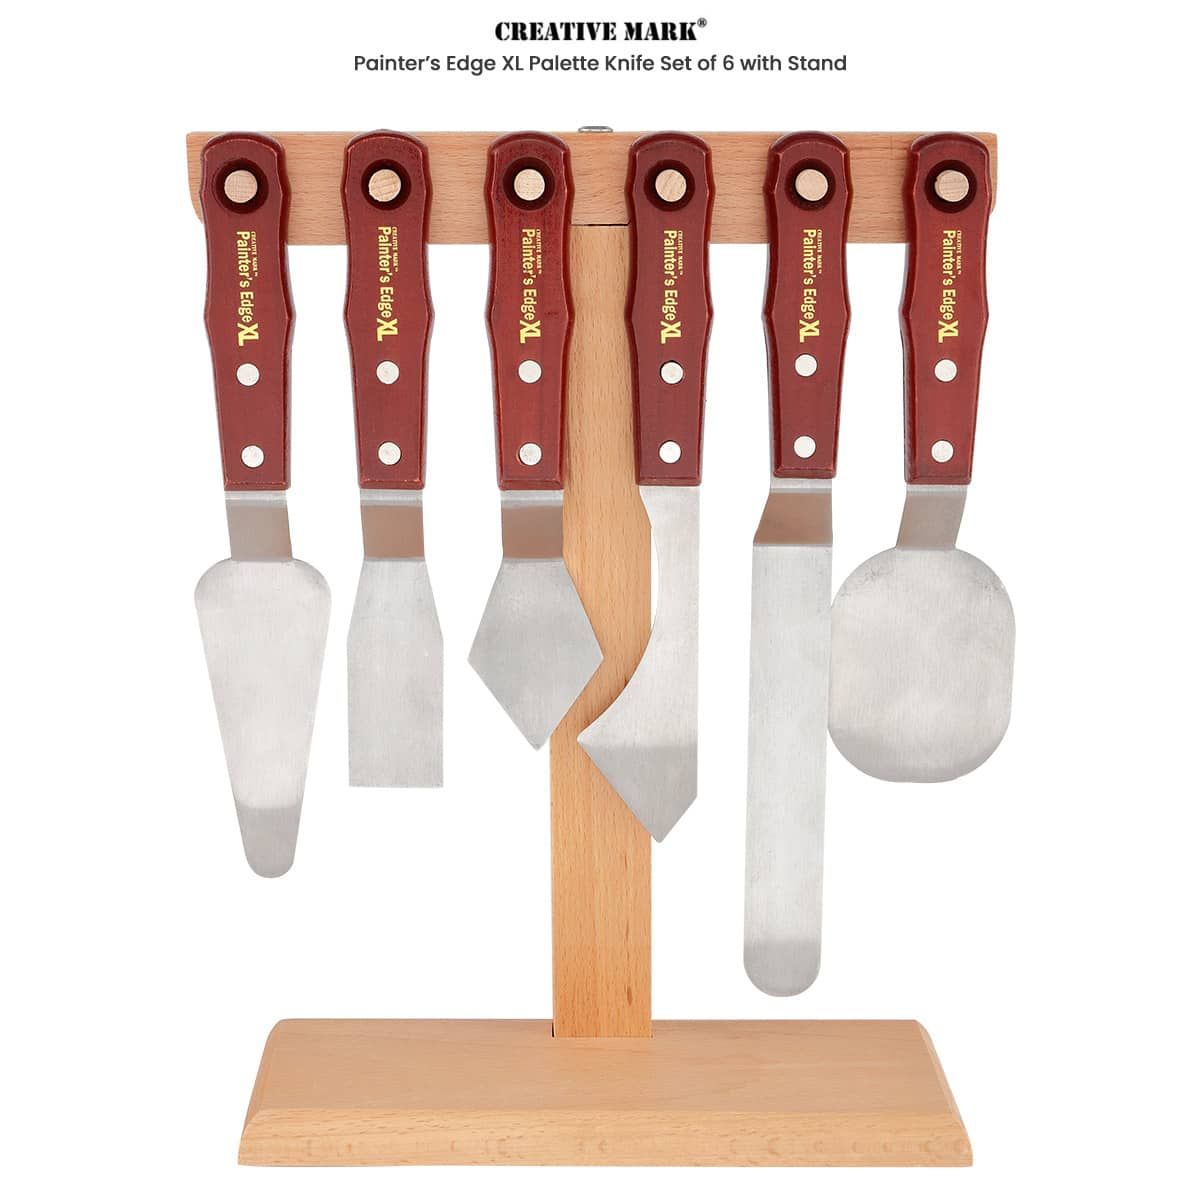 Creative Mark Painter's Edge XL Palette Knife and Stand Set